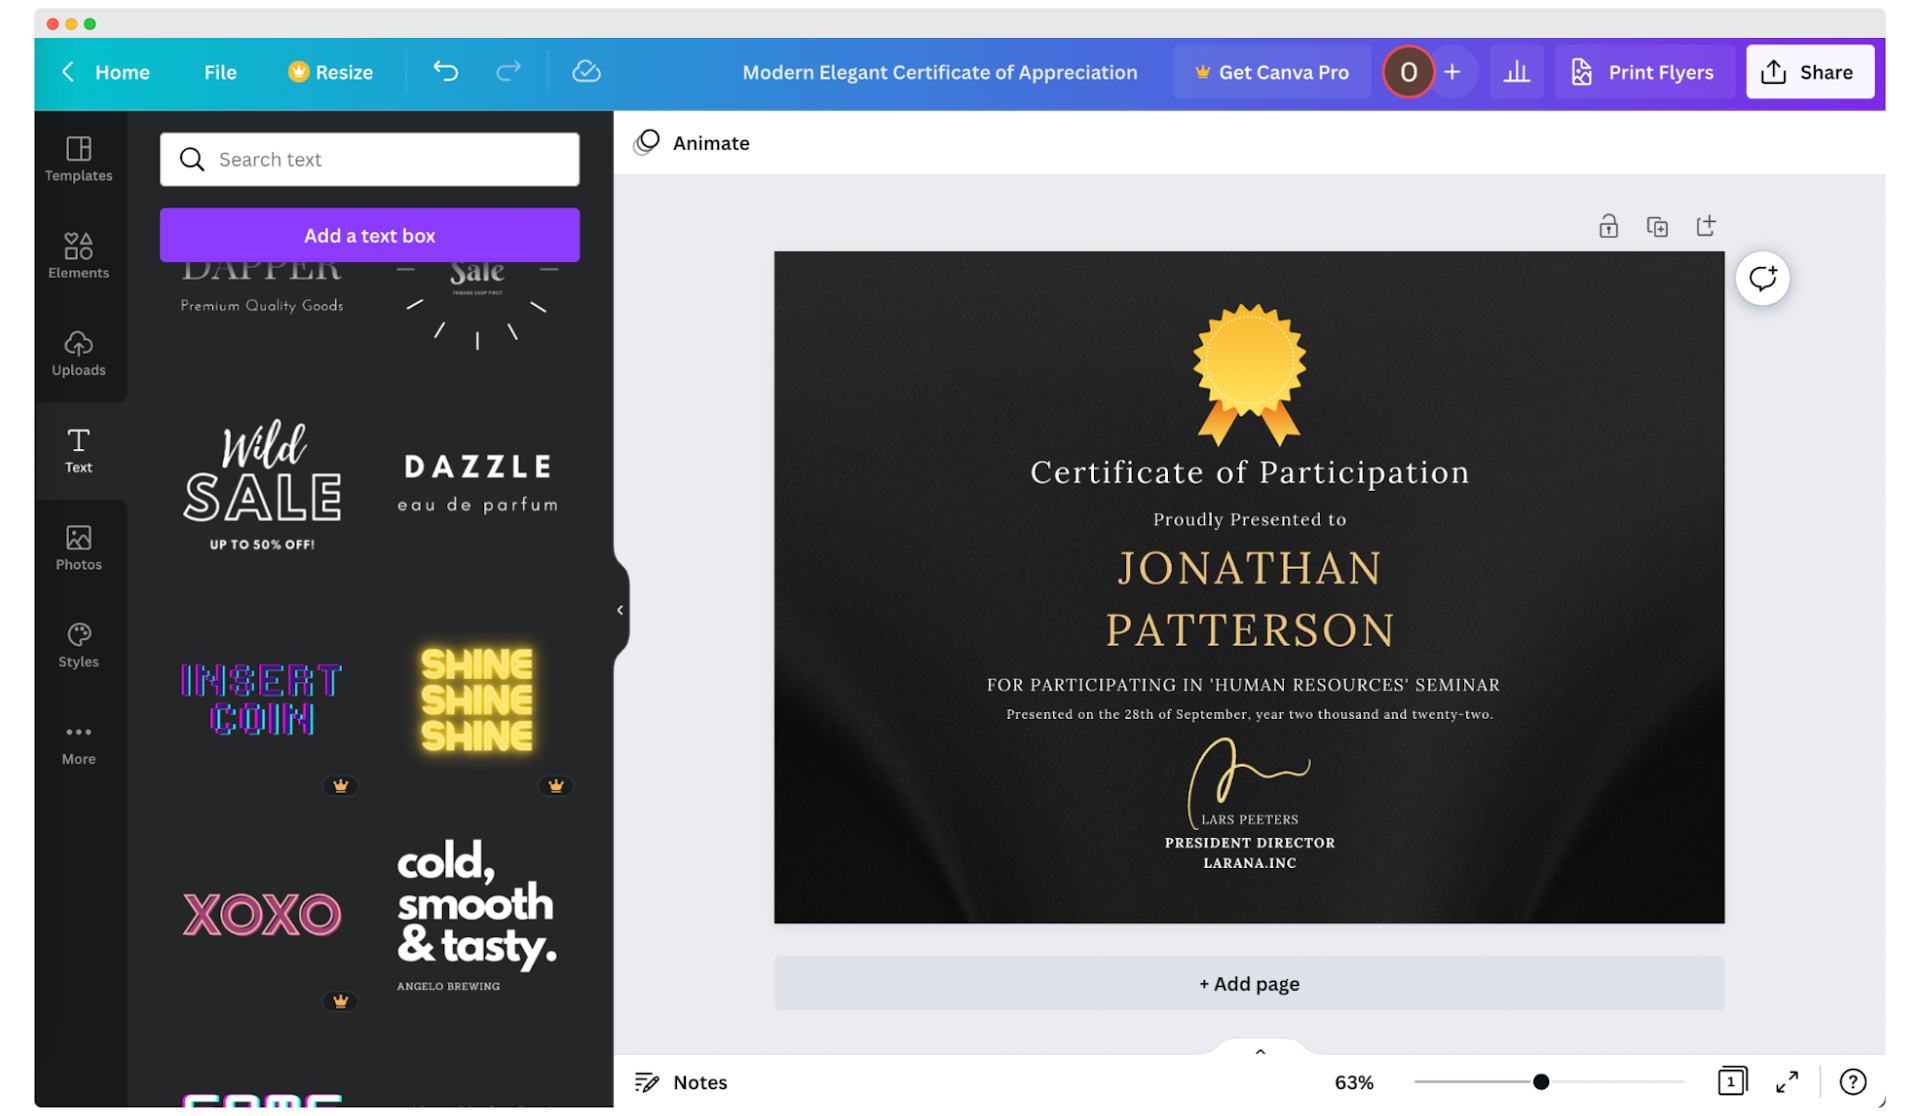 Generating multiple certificates with different names via Canva.